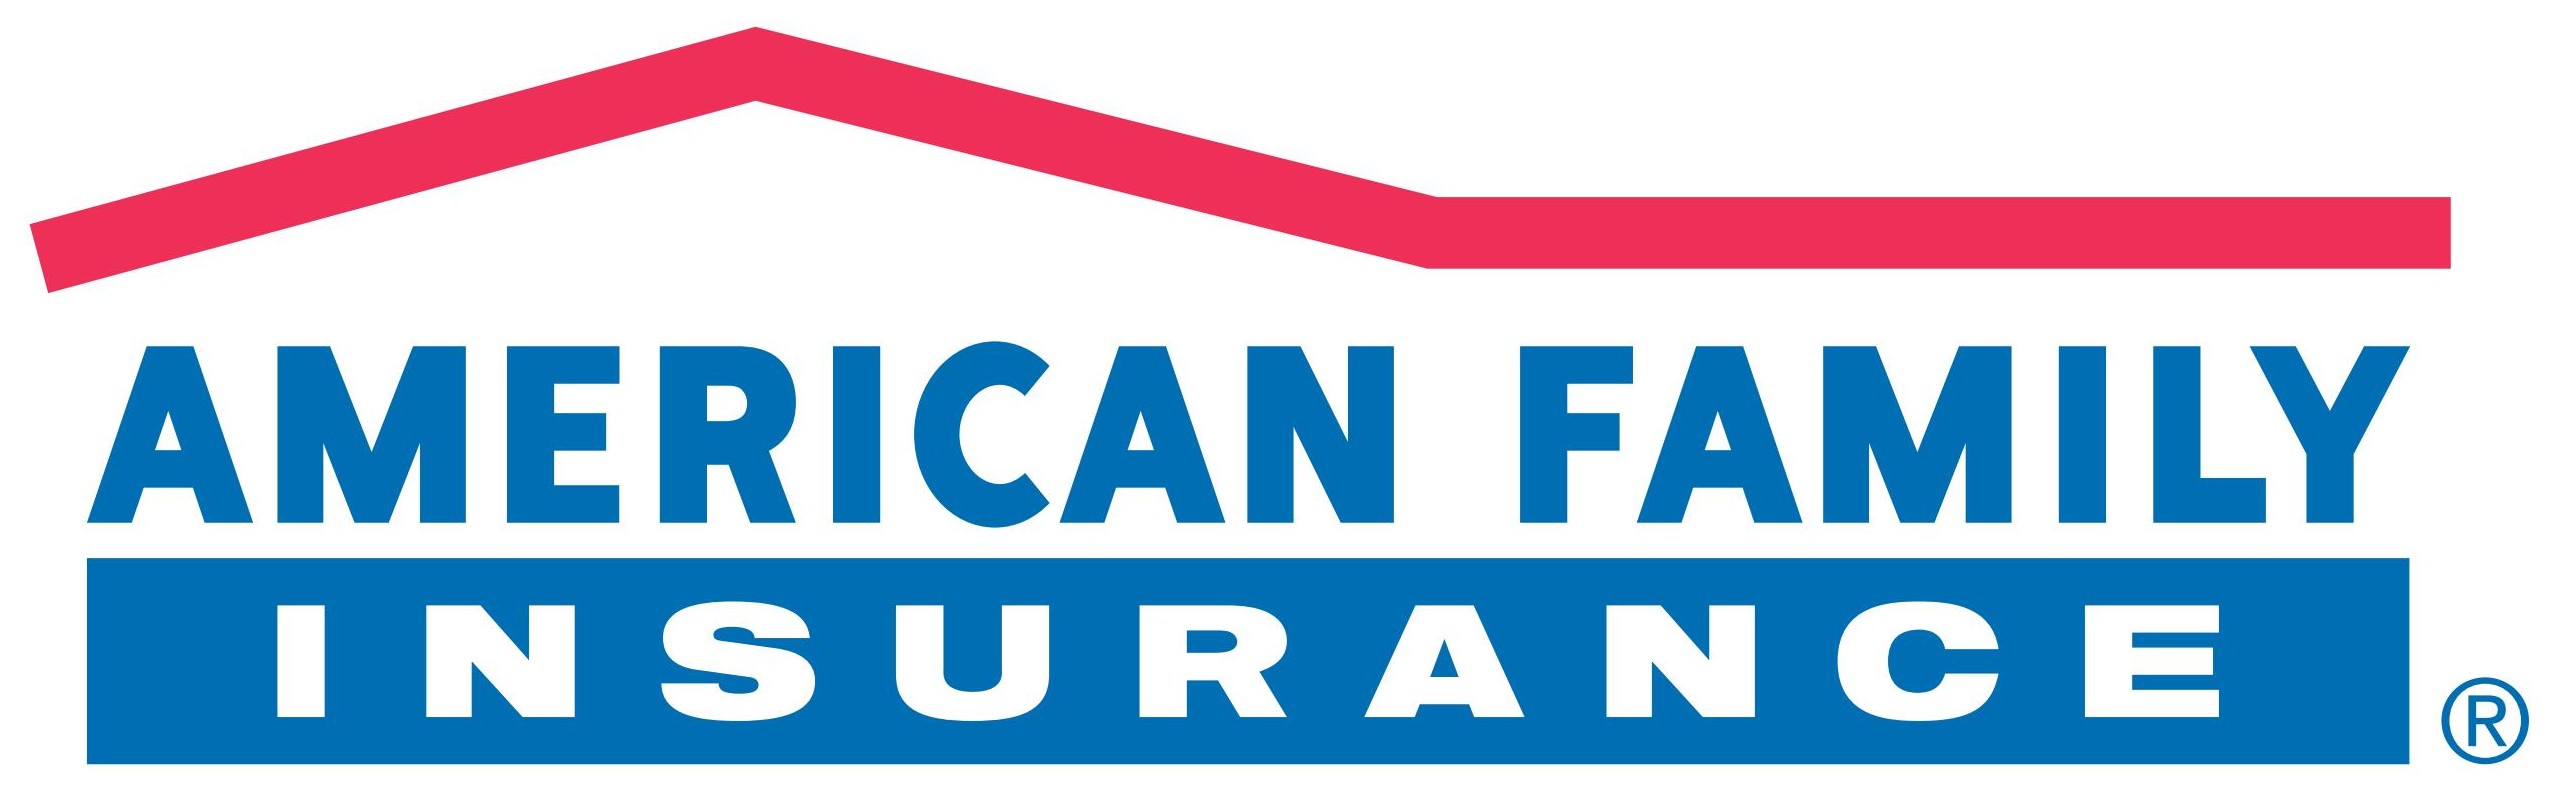 American Family Insurance's Image